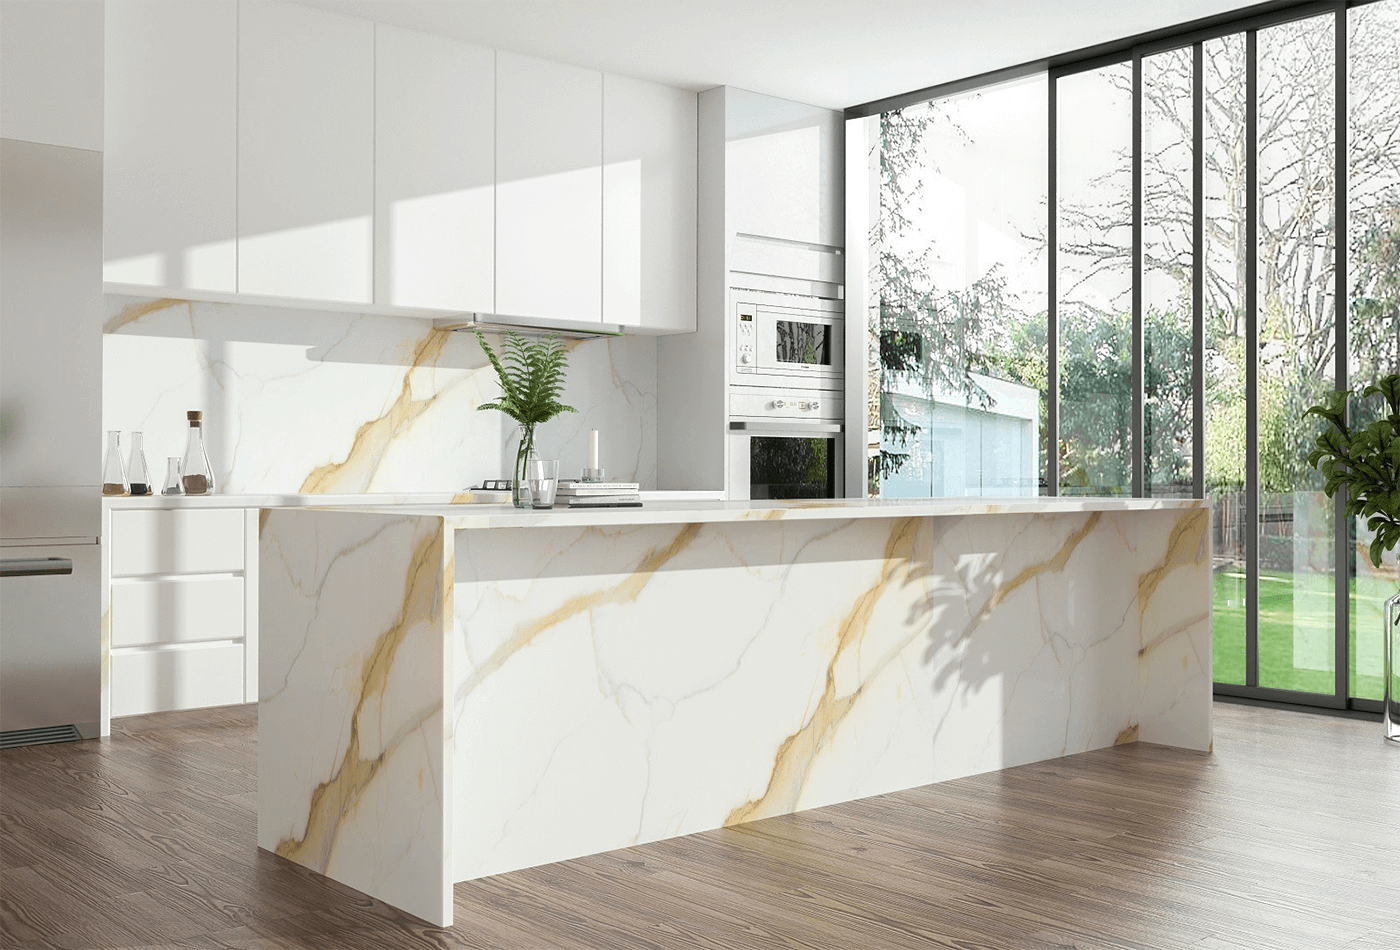 From Granite To Quartz, Everything You Need For A New Home Makeover